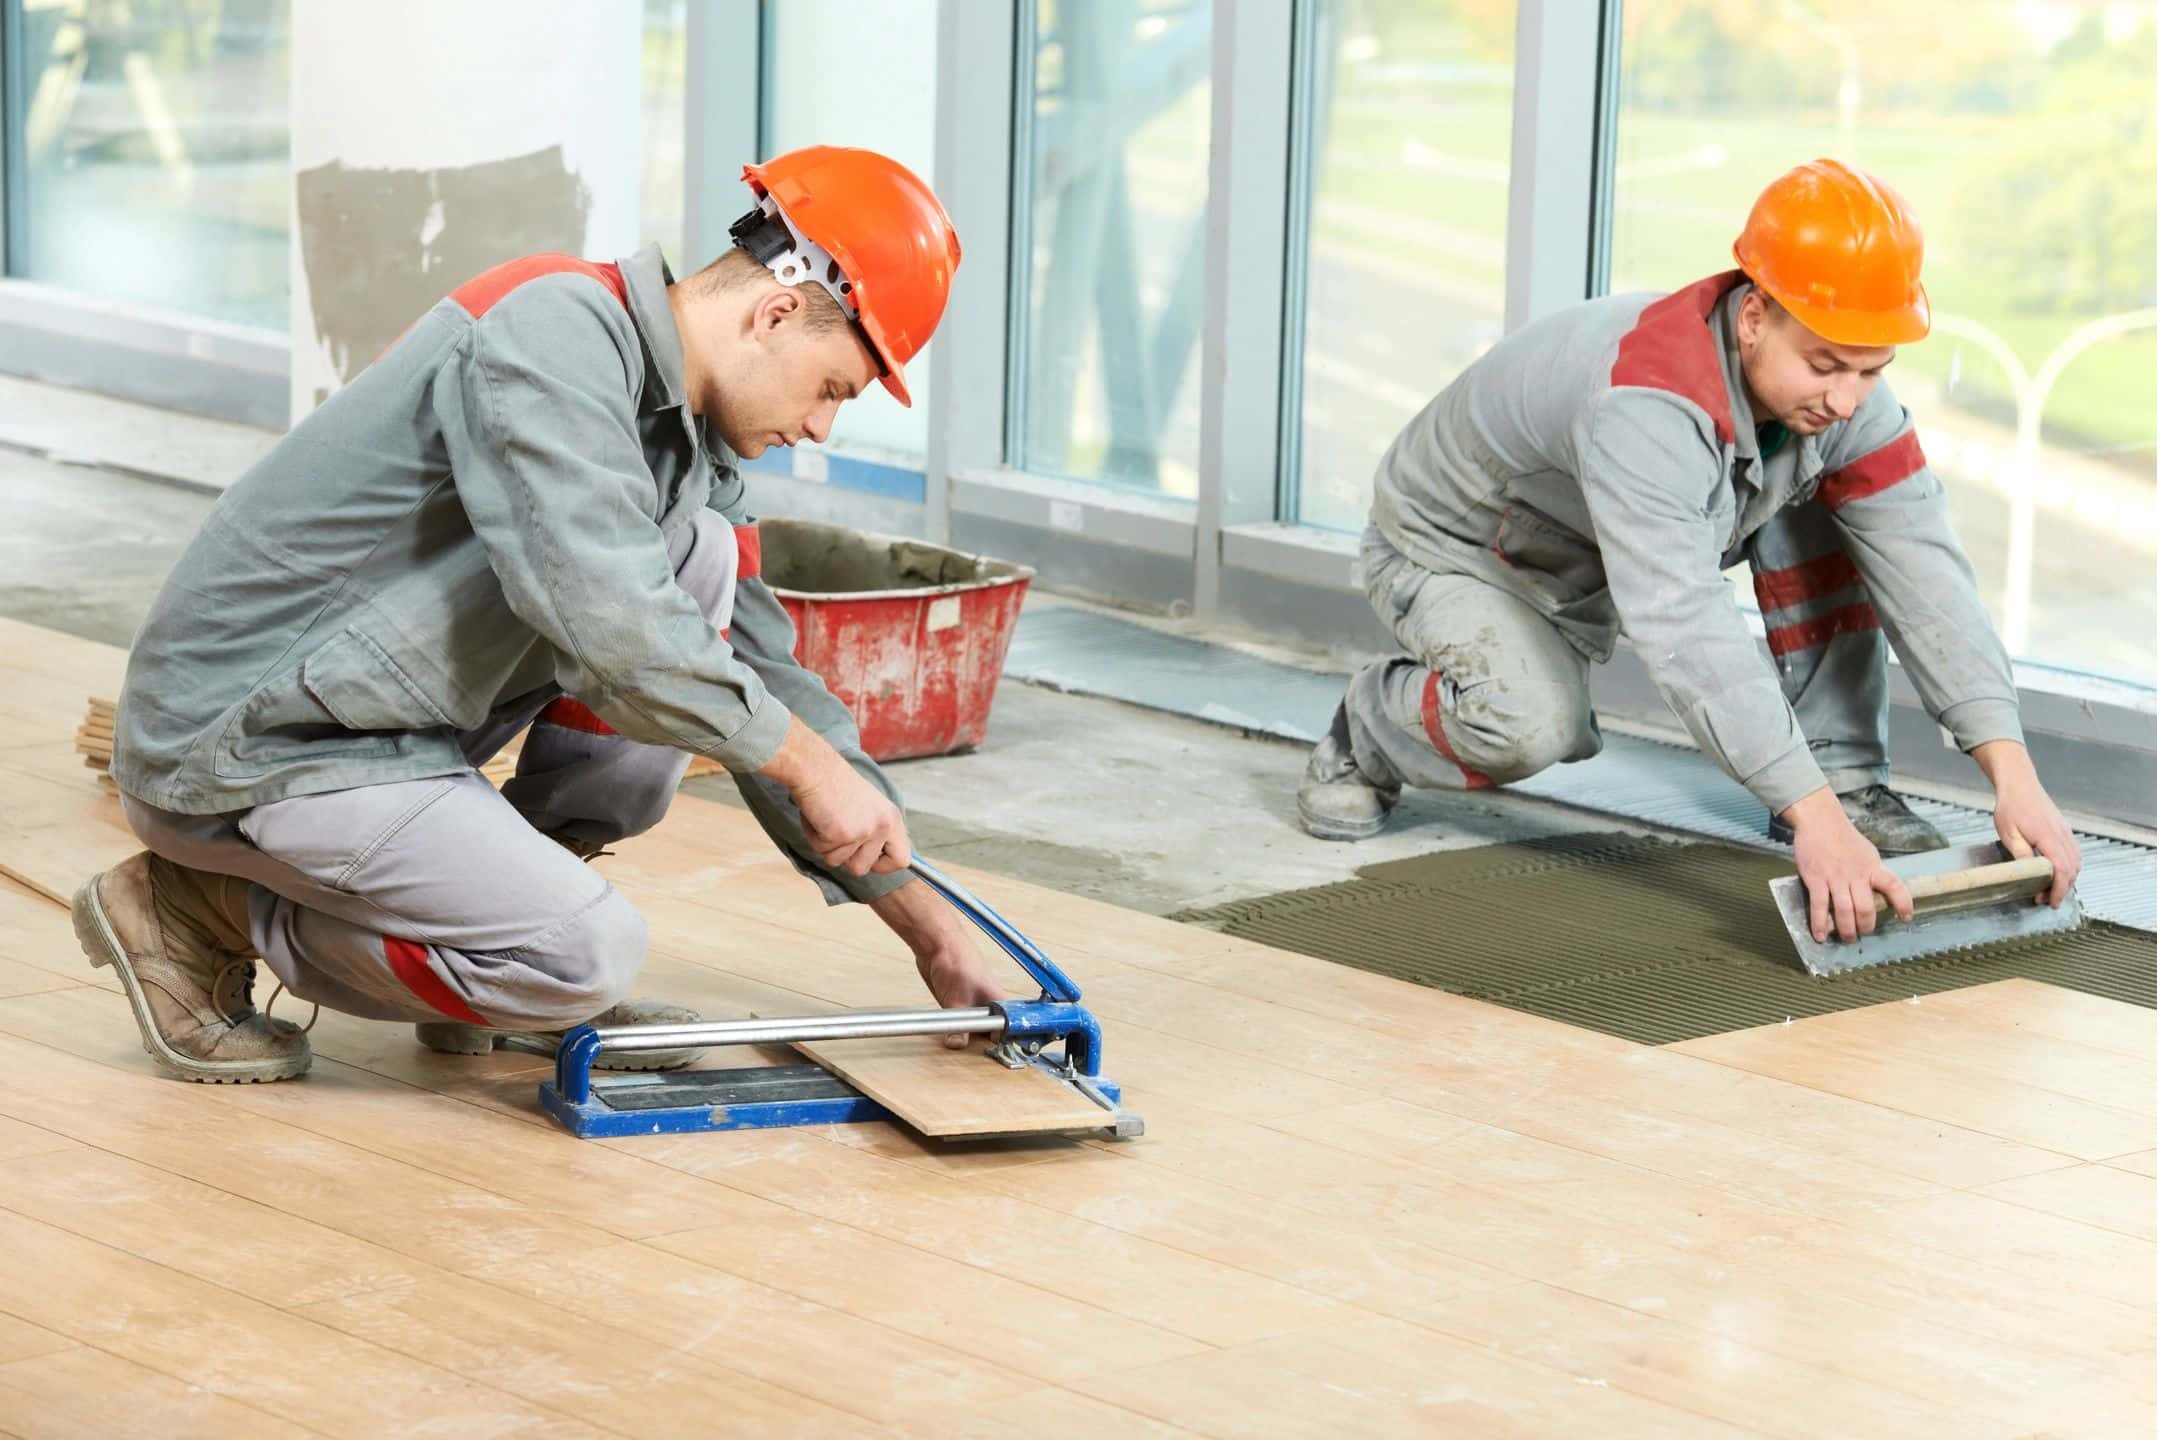 Technicians laying wood flooring panels on a floor, while wearing orange hard hats and gray uniforms.